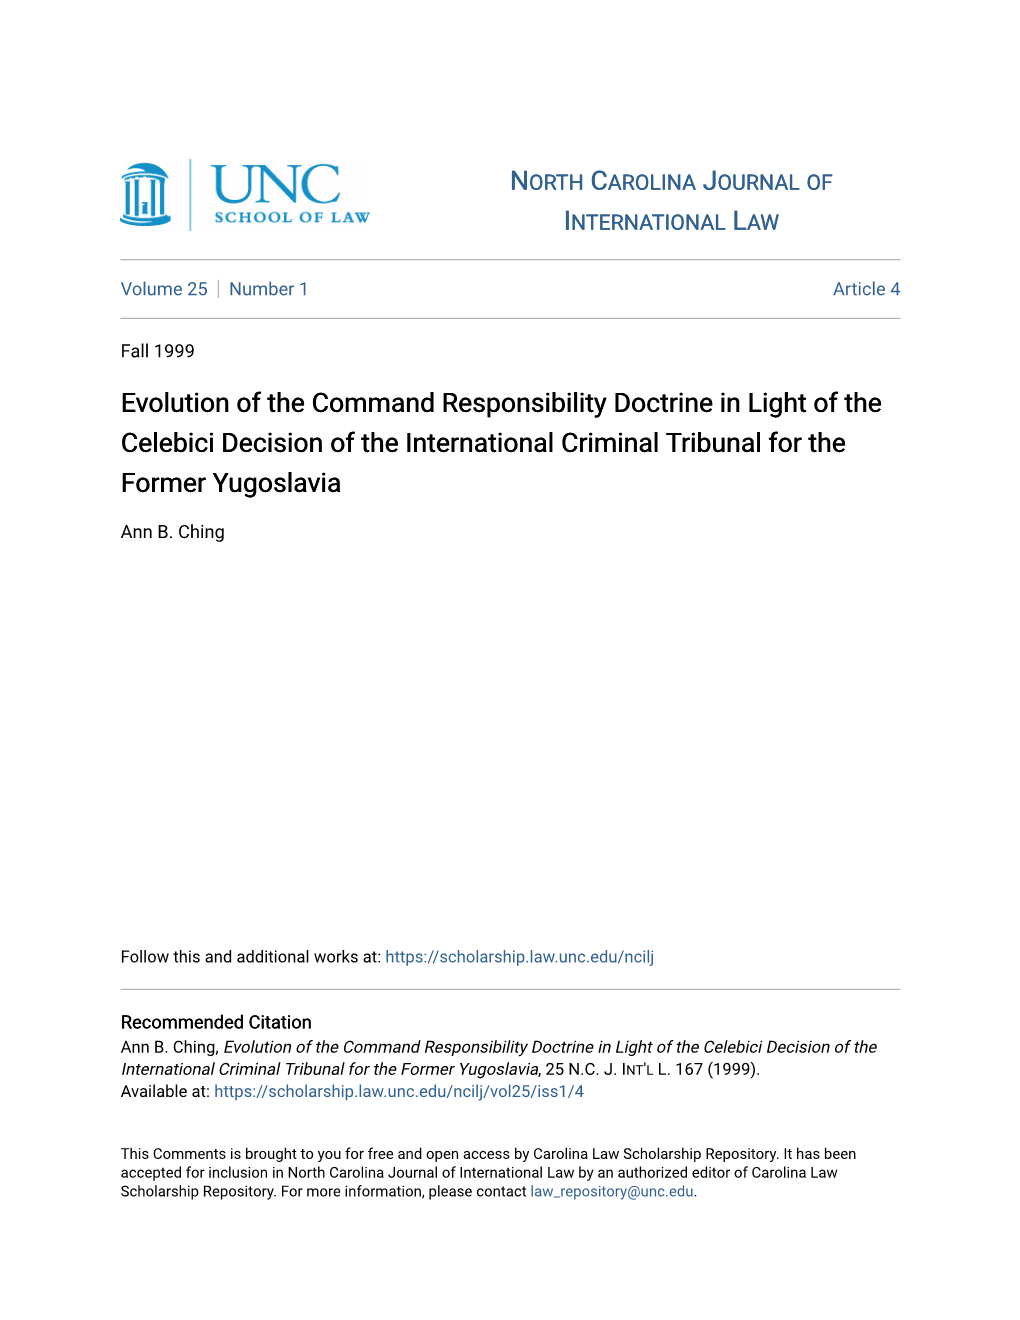 Evolution of the Command Responsibility Doctrine in Light of the Celebici Decision of the International Criminal Tribunal for the Former Yugoslavia